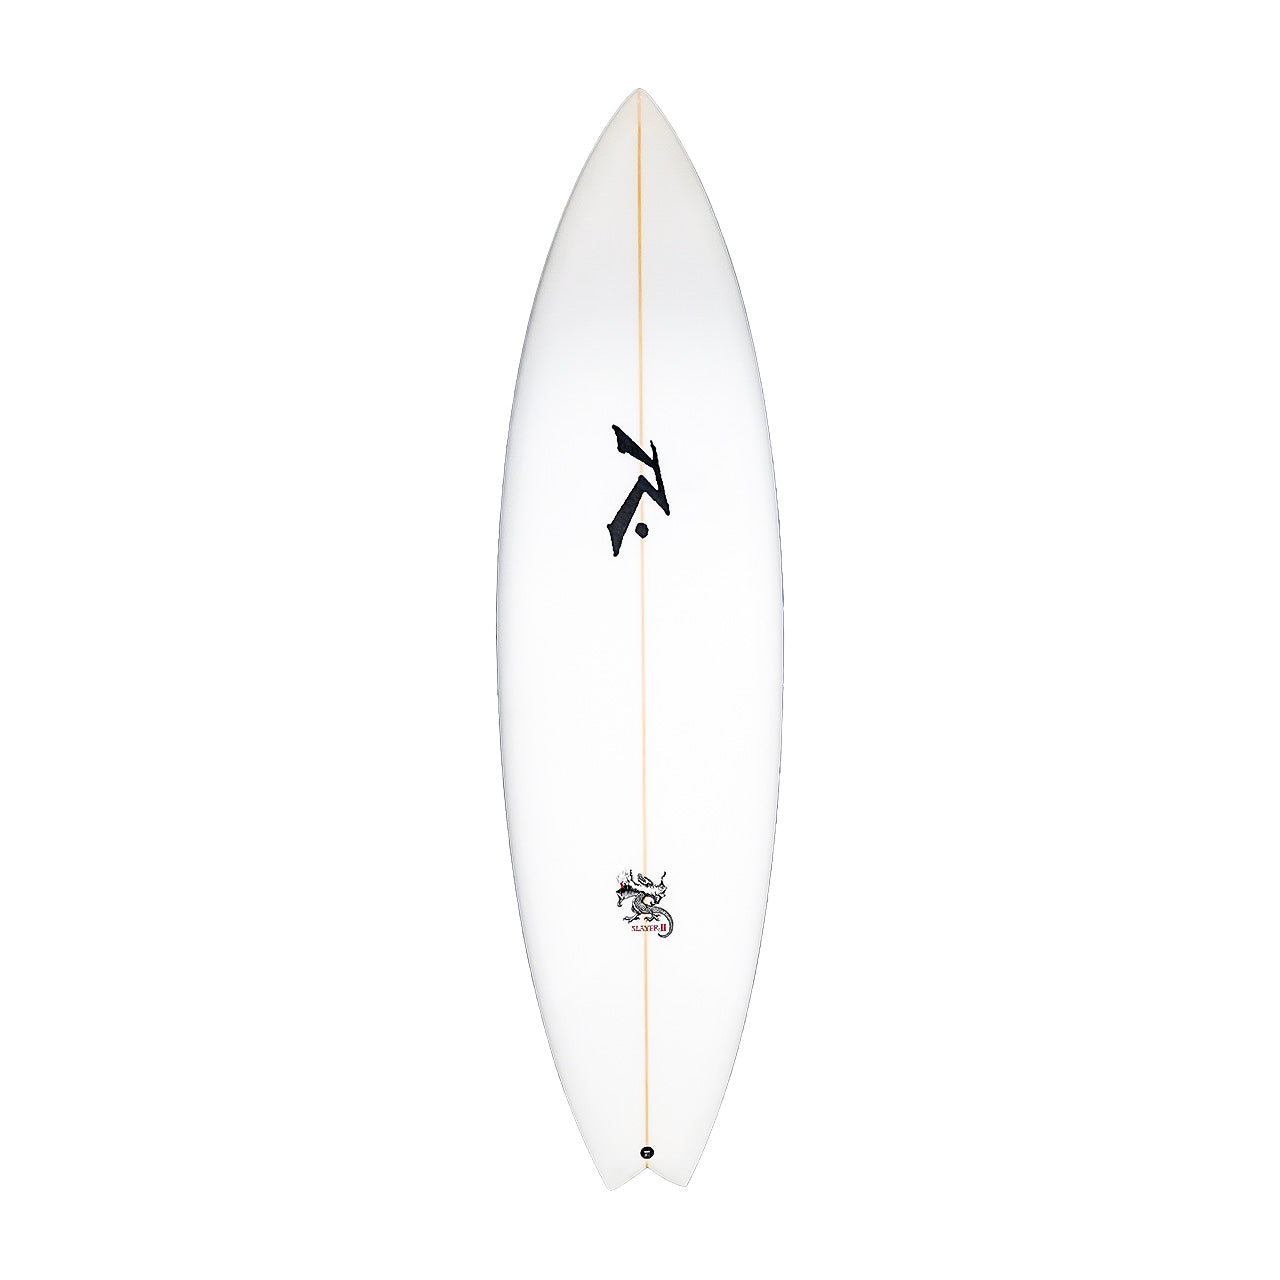 Rick Hamon custom with 5 fins and swallow tail - Deck View - Rusty Surfboards